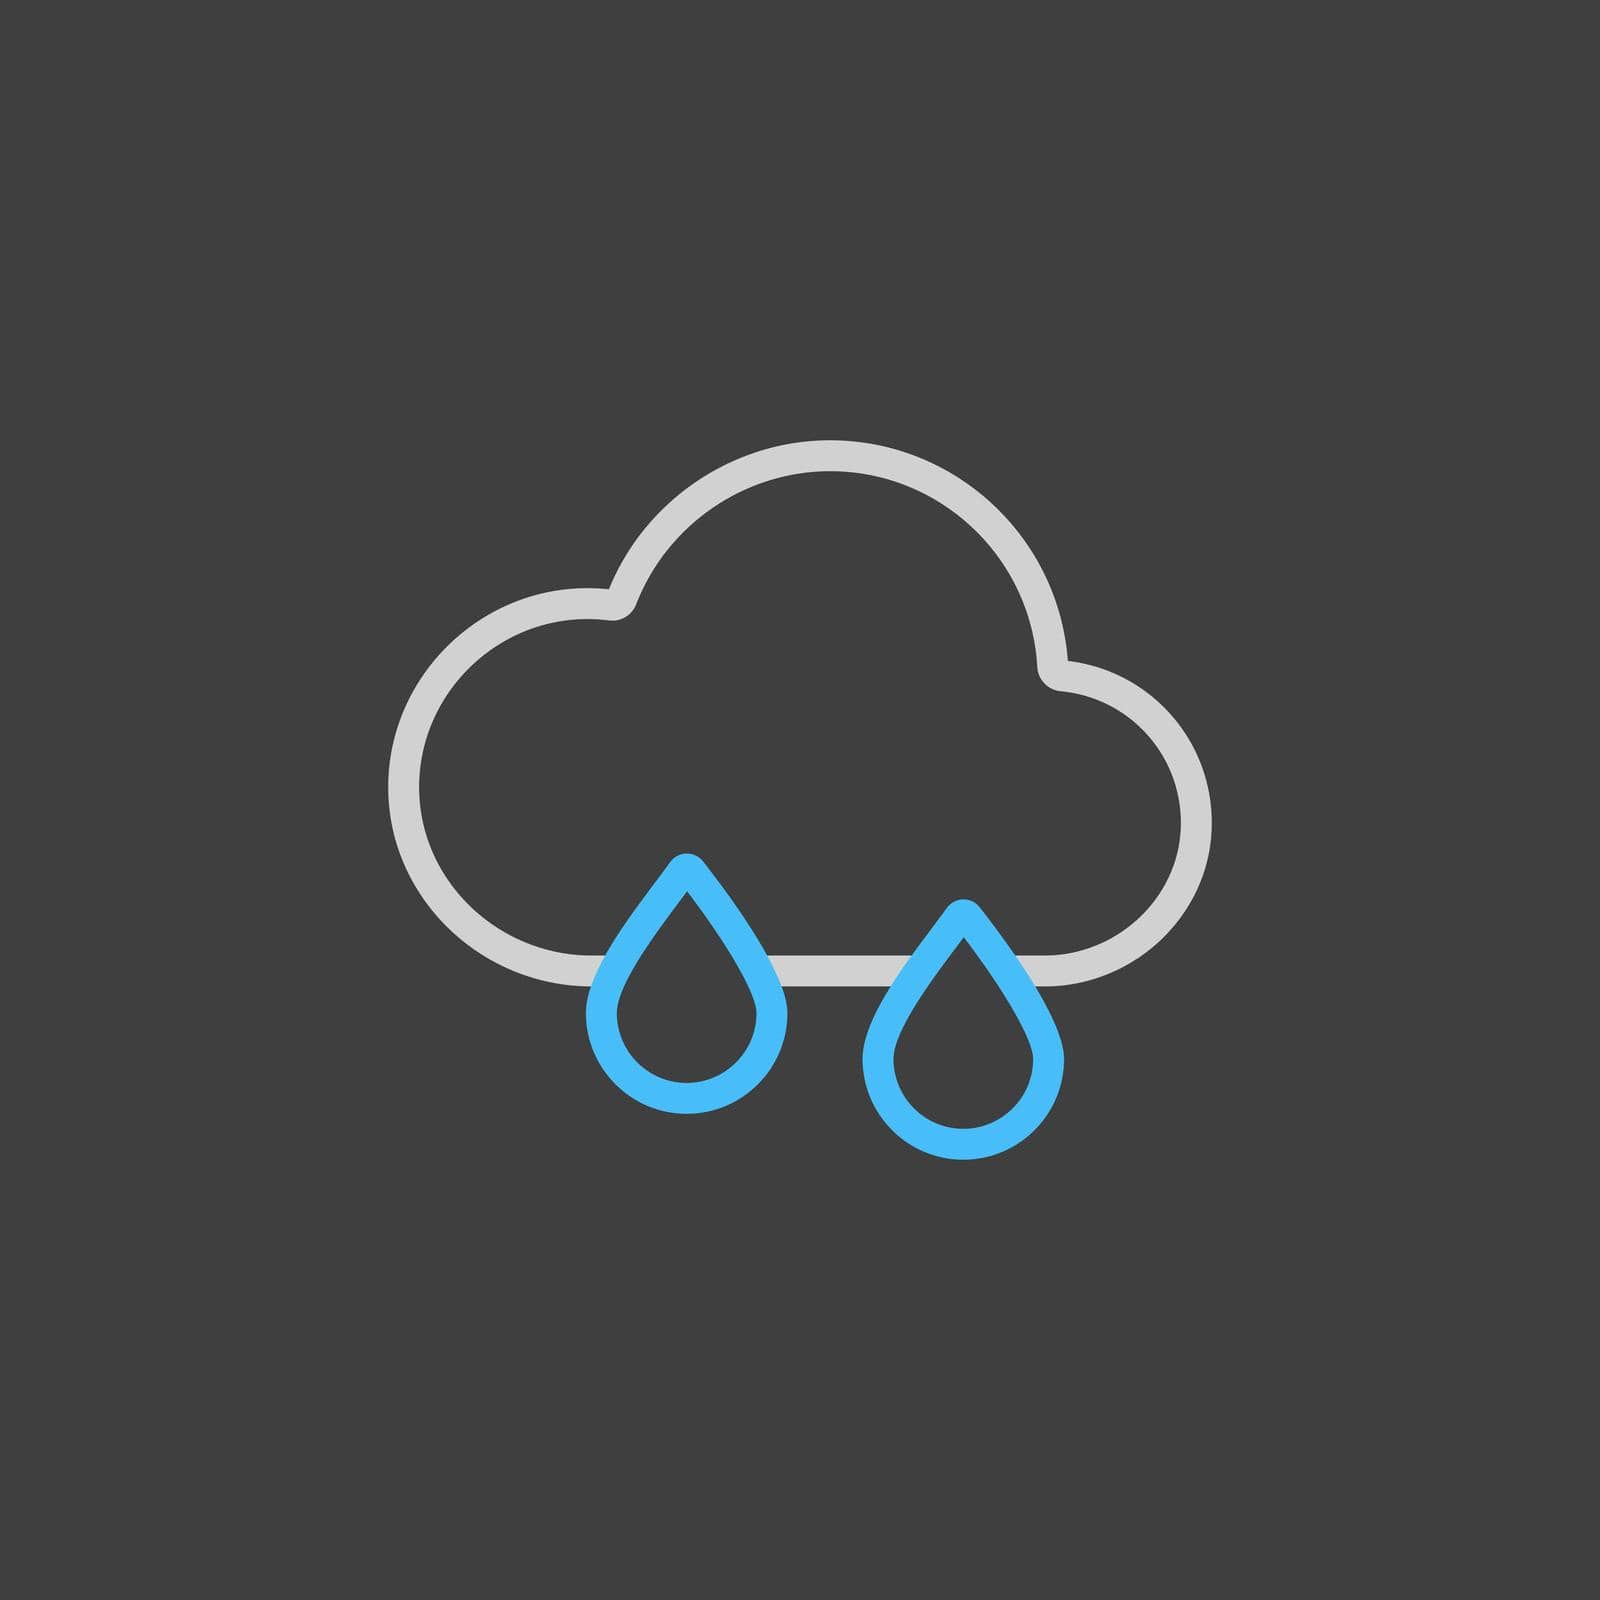 Raincloud with raindrops vector icon on dark background. Weather sign by nosik